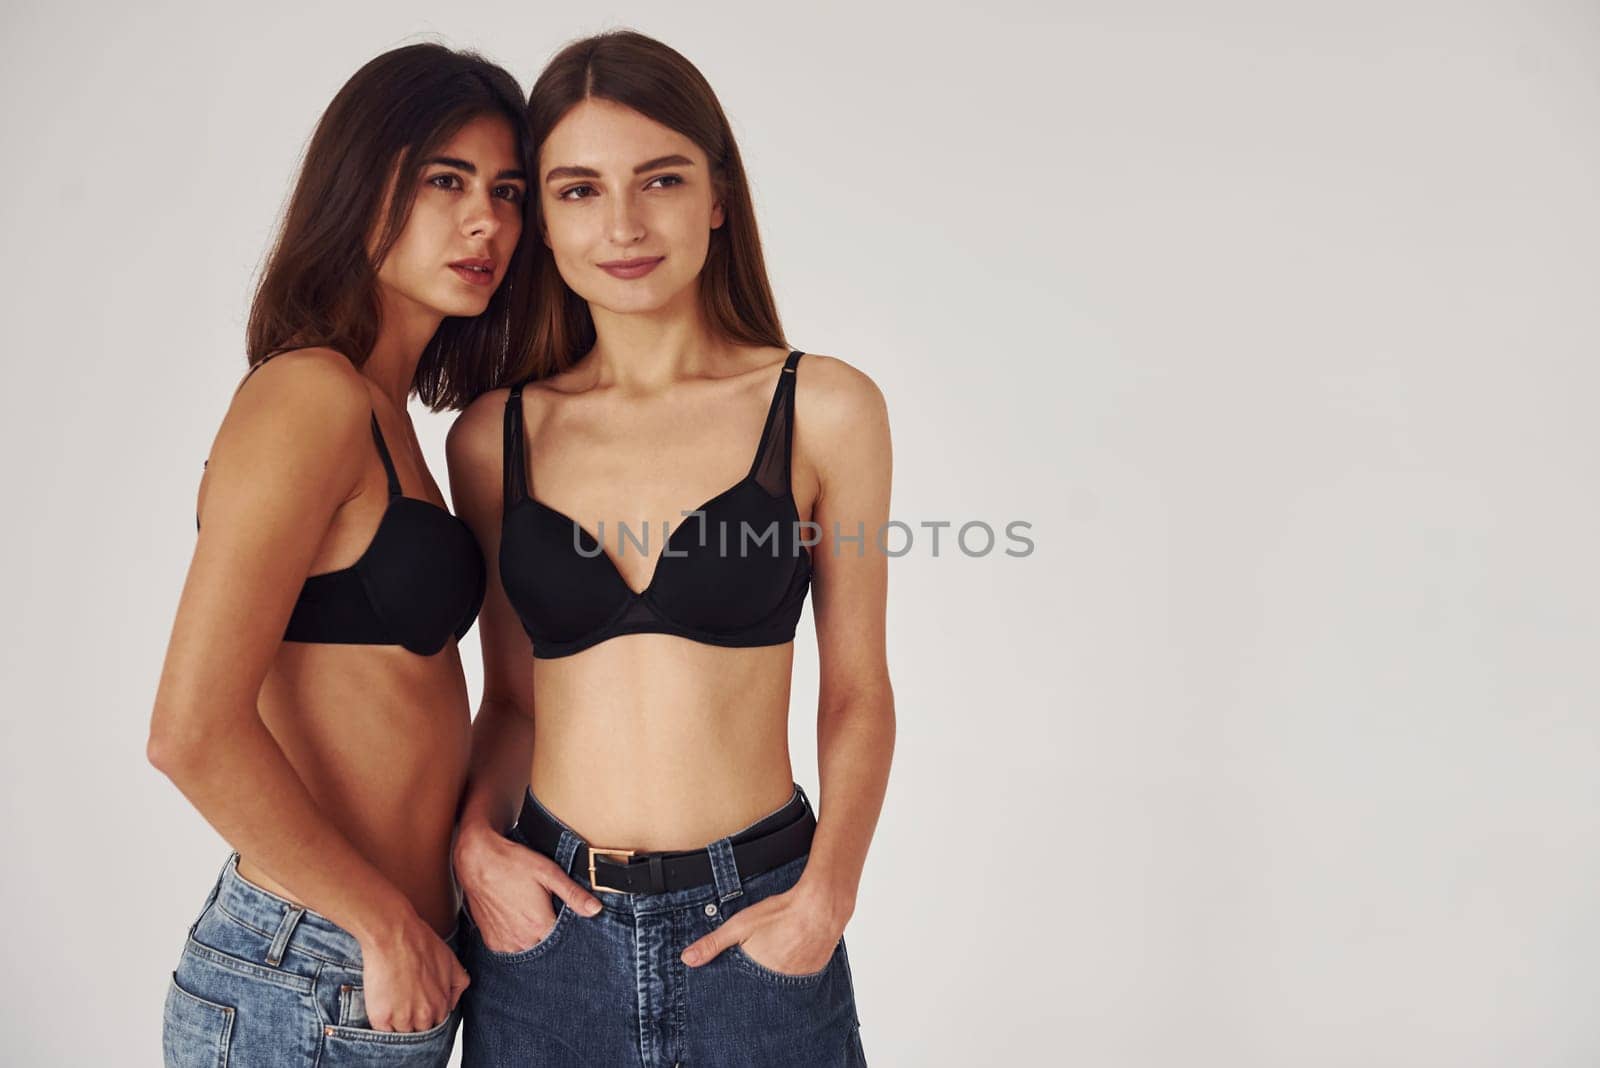 Two young women in lingerie together indoors. White background.